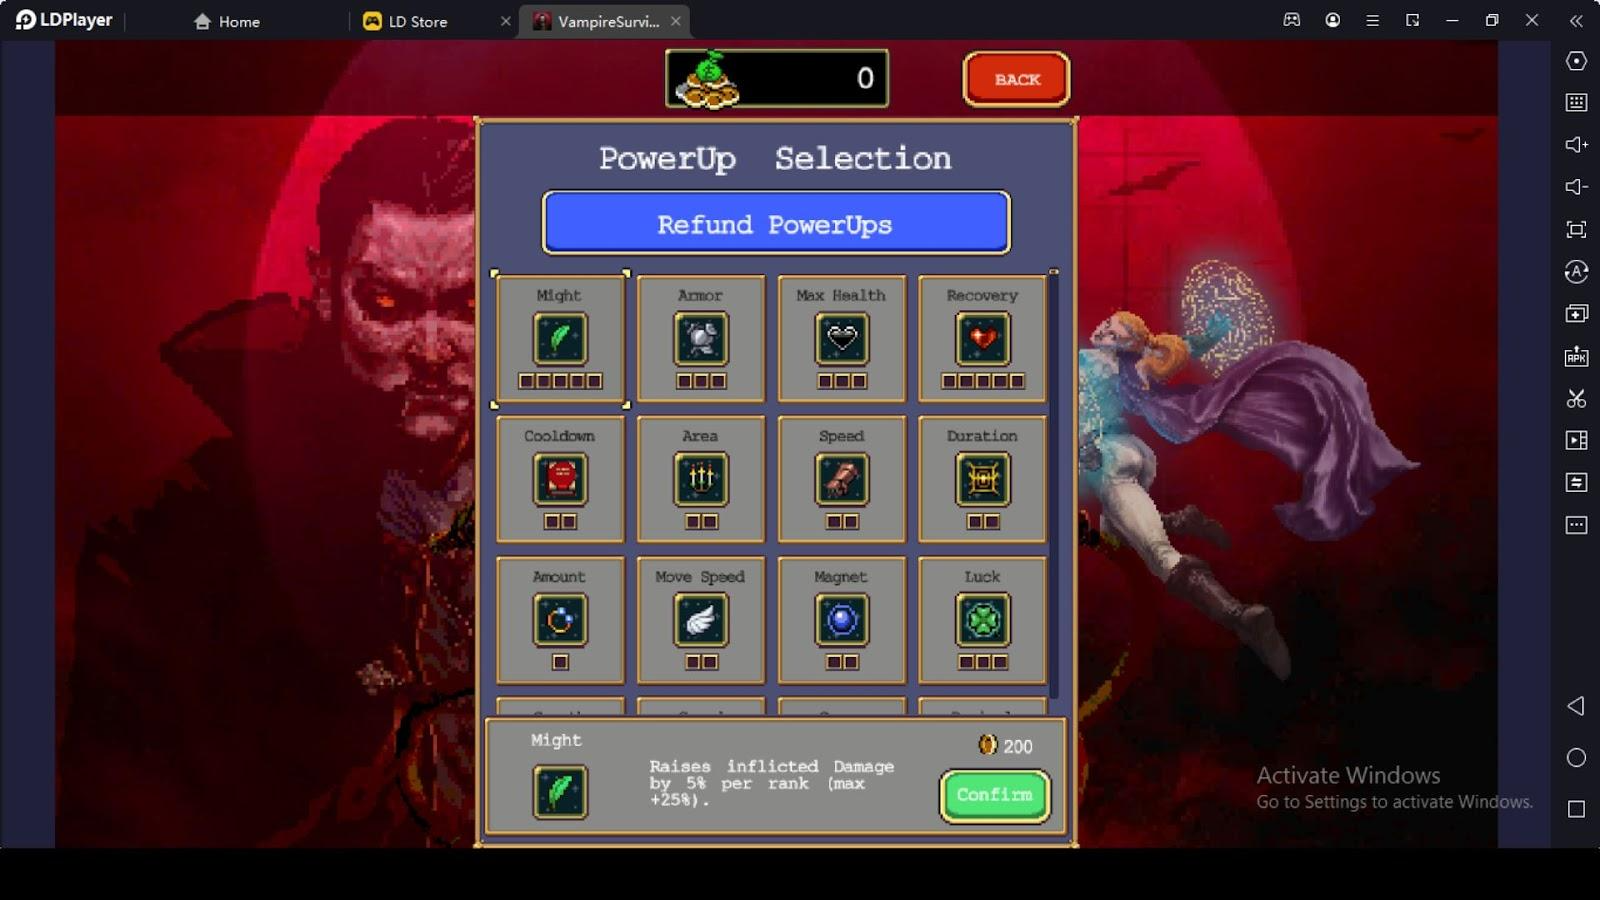 Vampire Survivors Guide for Power-Up Attributes